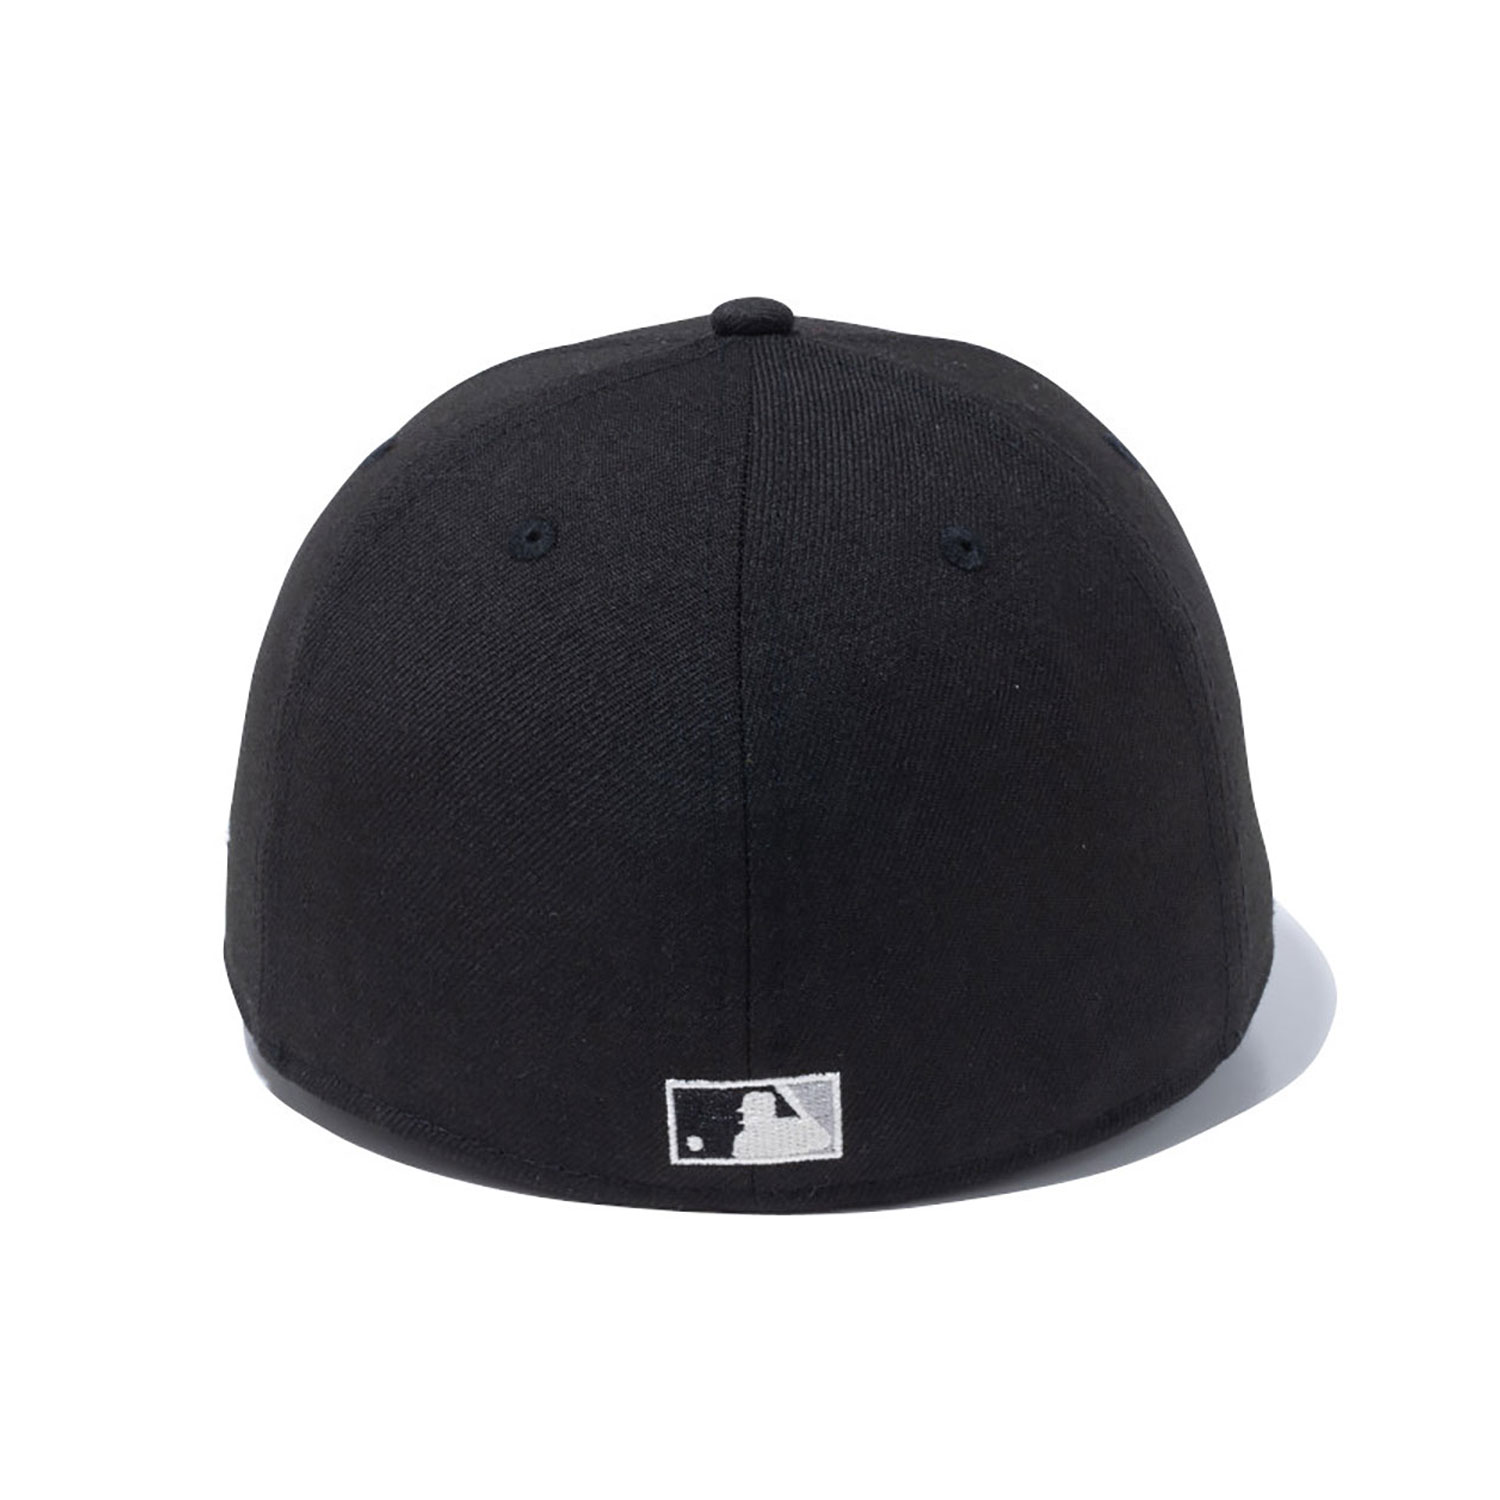 New York Yankees New Era Japan Black Low Profile 59FIFTY Fitted Cap